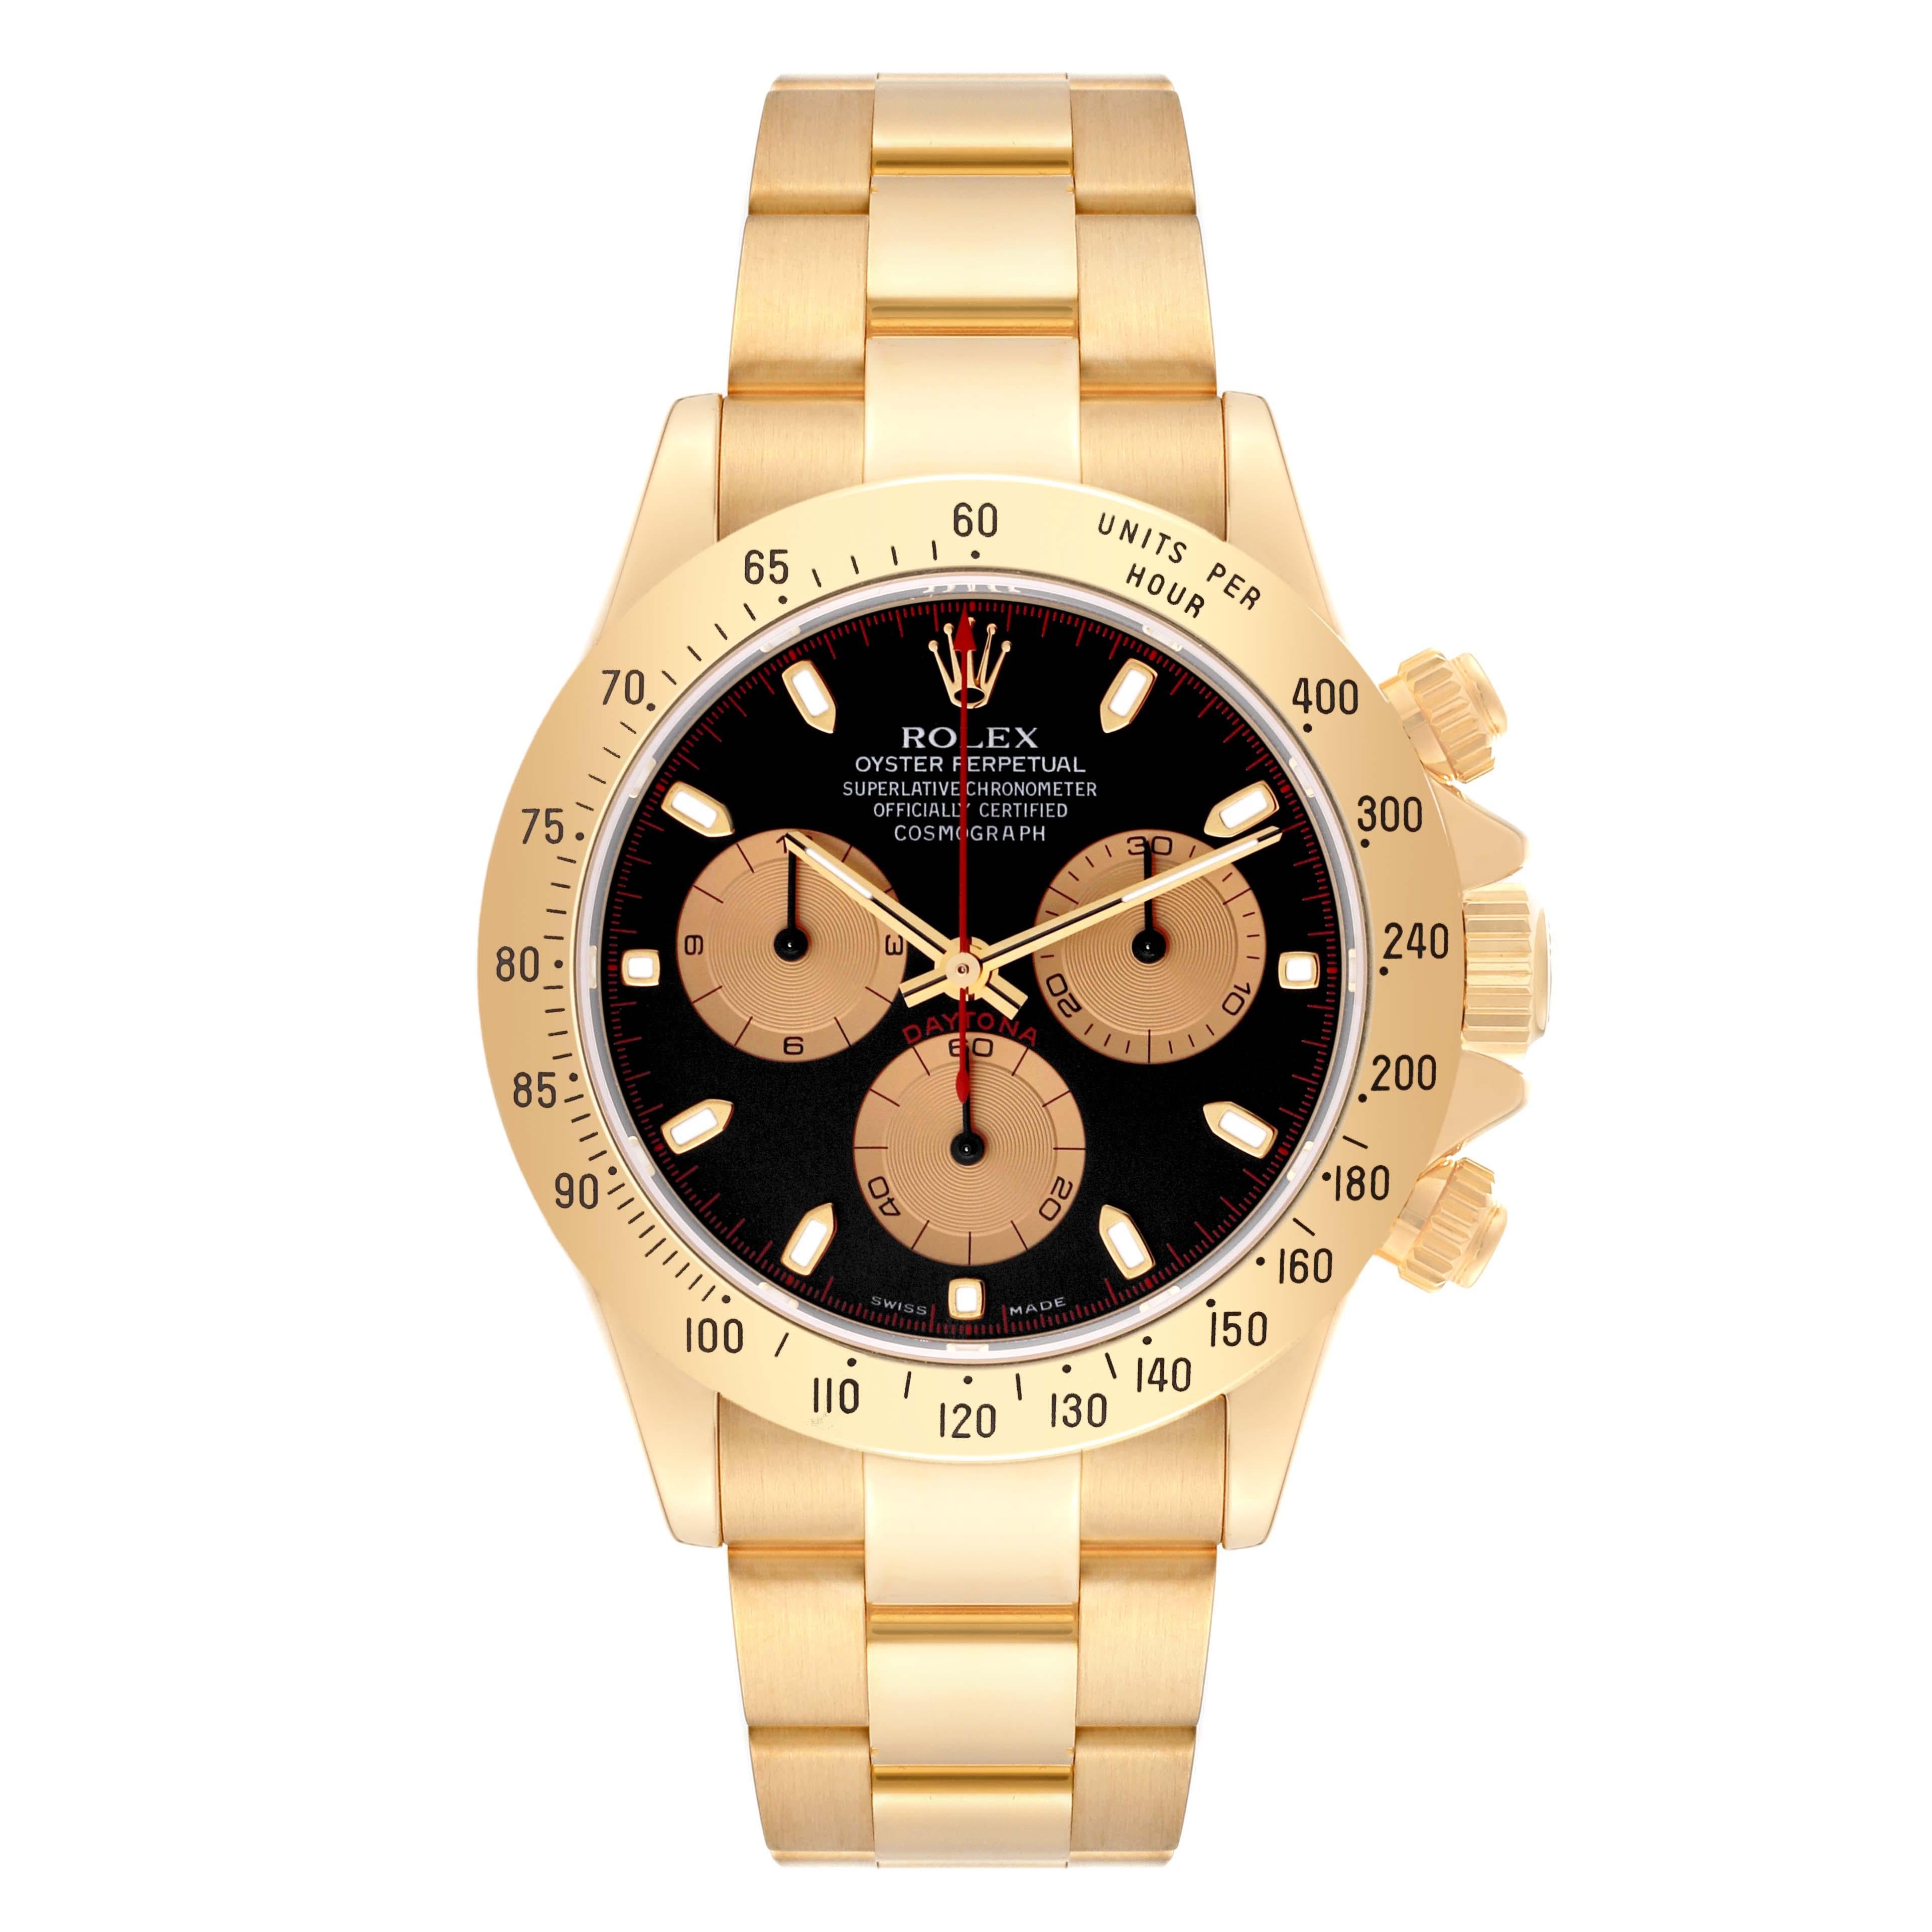 Rolex Cosmograph Daytona Yellow Gold Black Dial Mens Watch 116528. Officially certified chronometer automatic self-winding movement. Rhodium-plated, oeil-de-perdrix decoration, straight line lever escapement, monometallic balance adjusted to 5